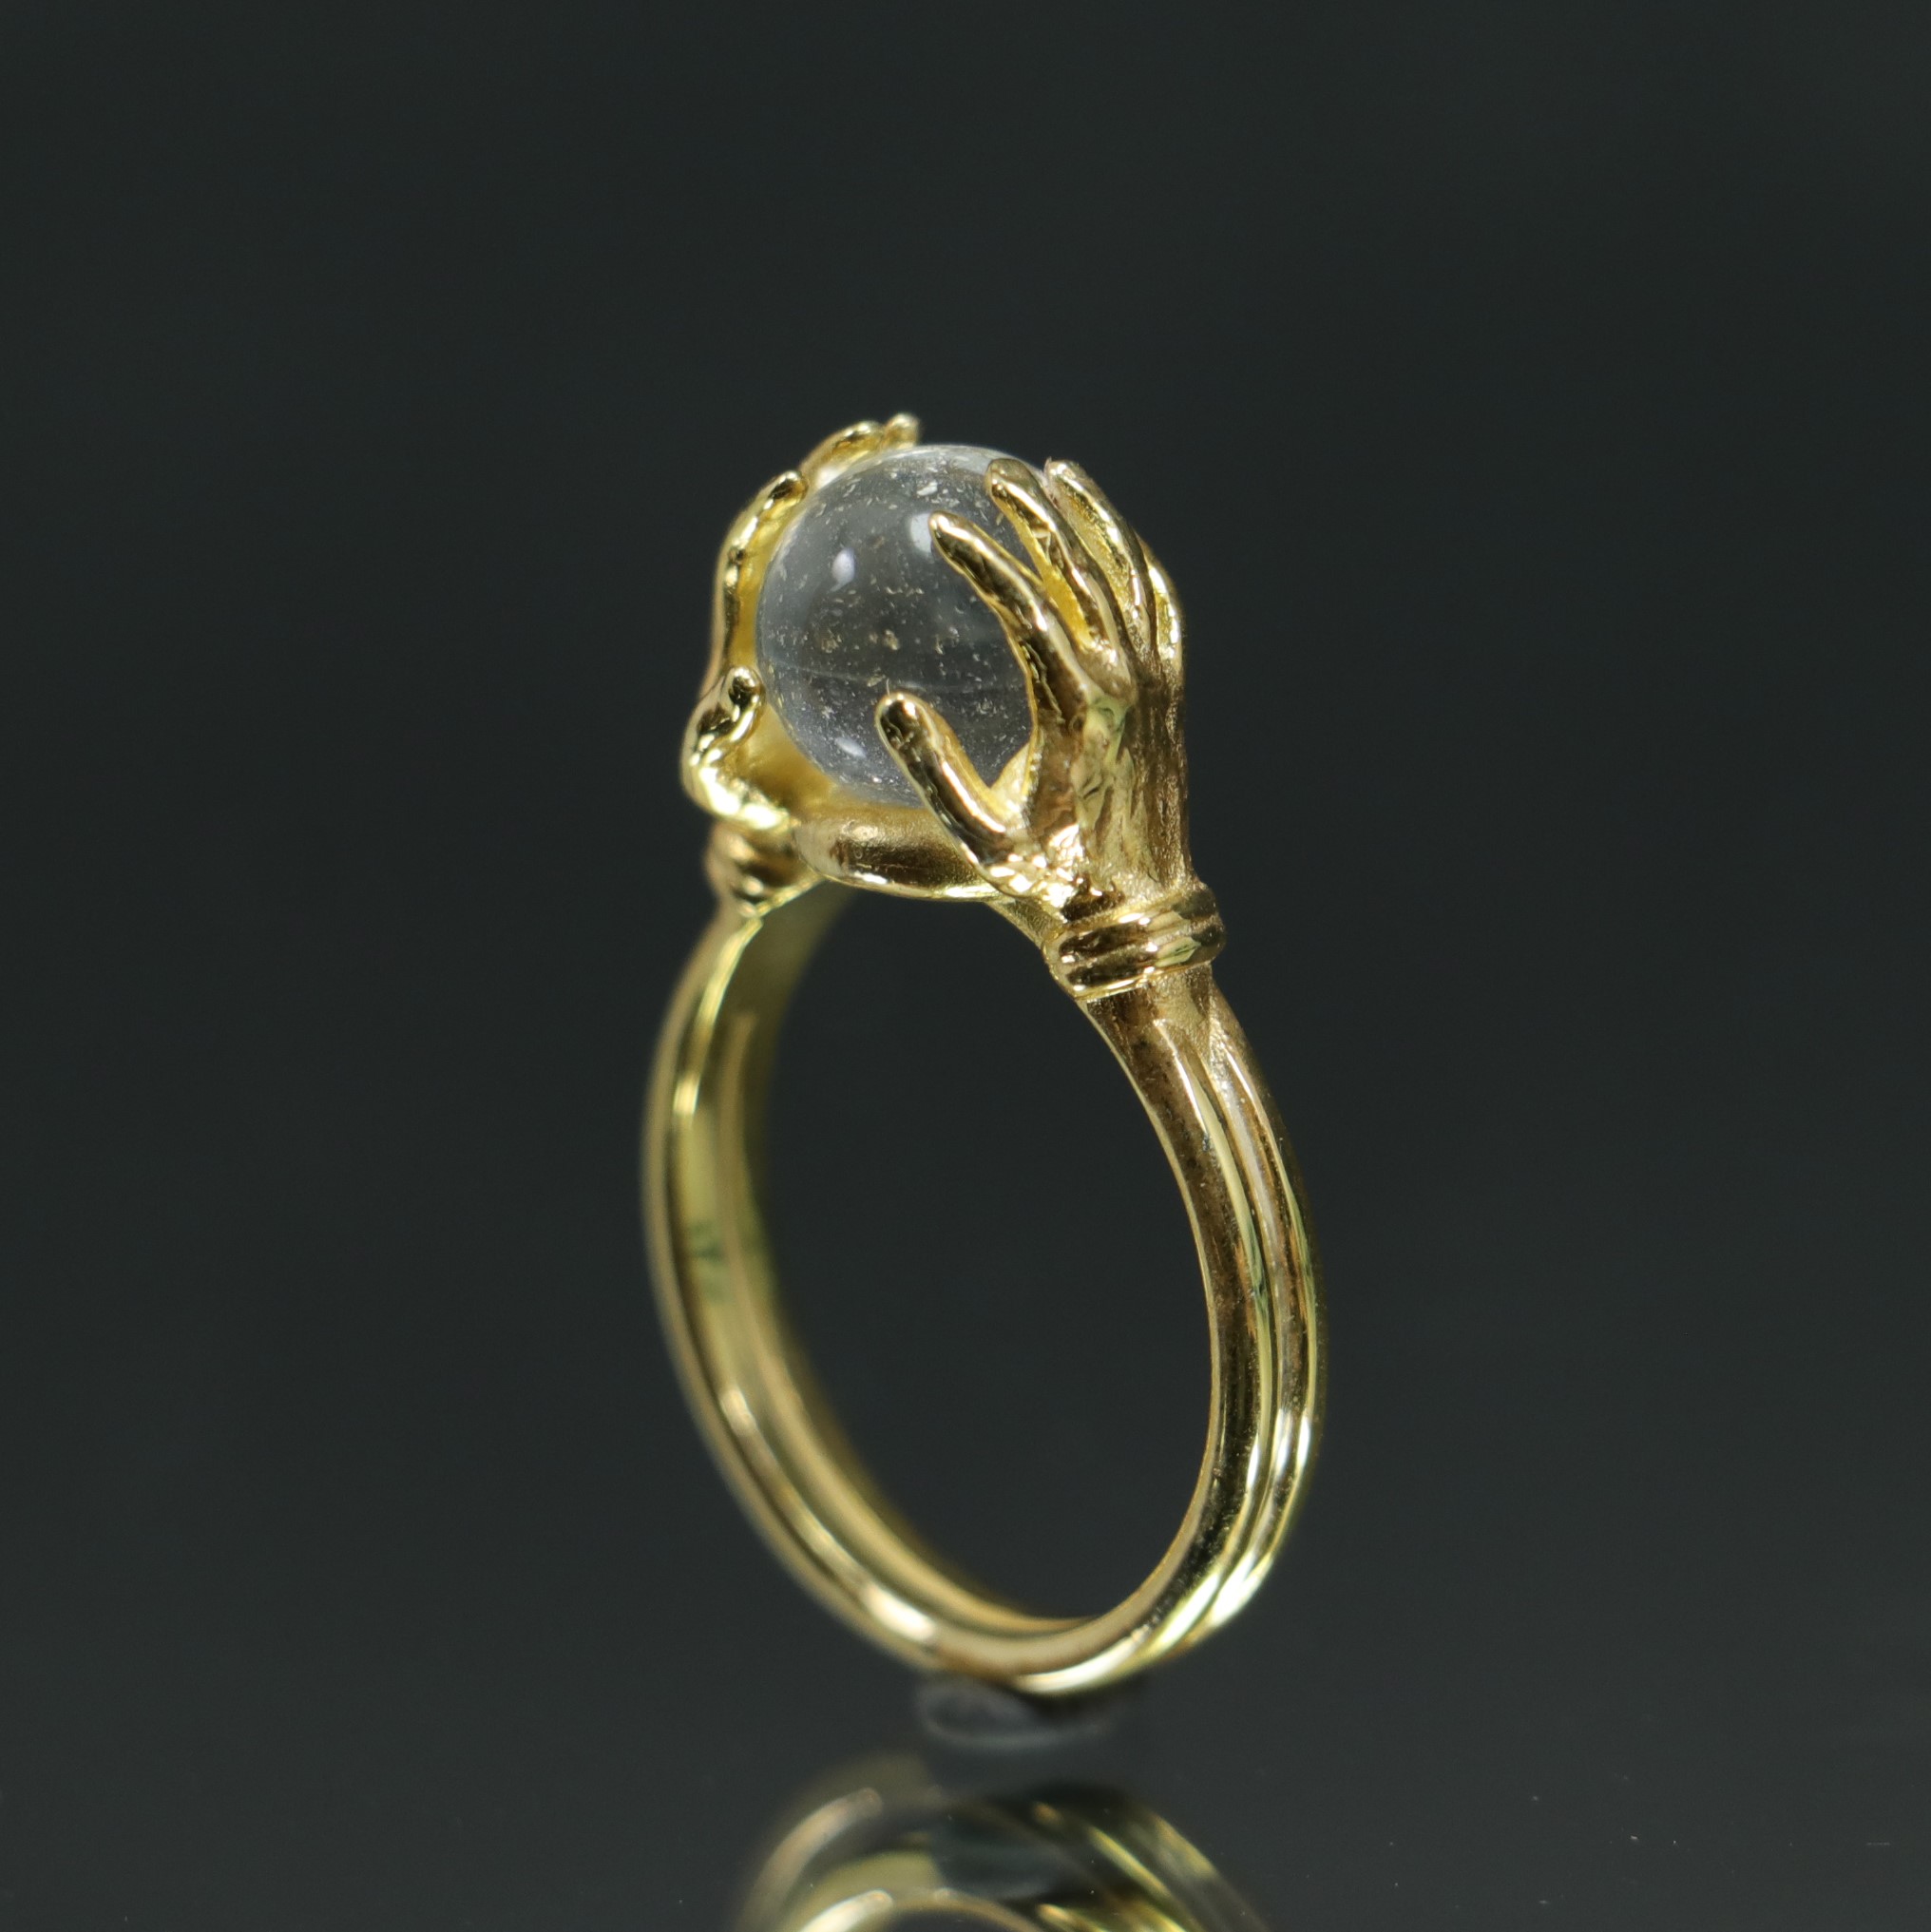 Clear Quartz 925 Sterling Silver Gold Plated Ring Between Hands